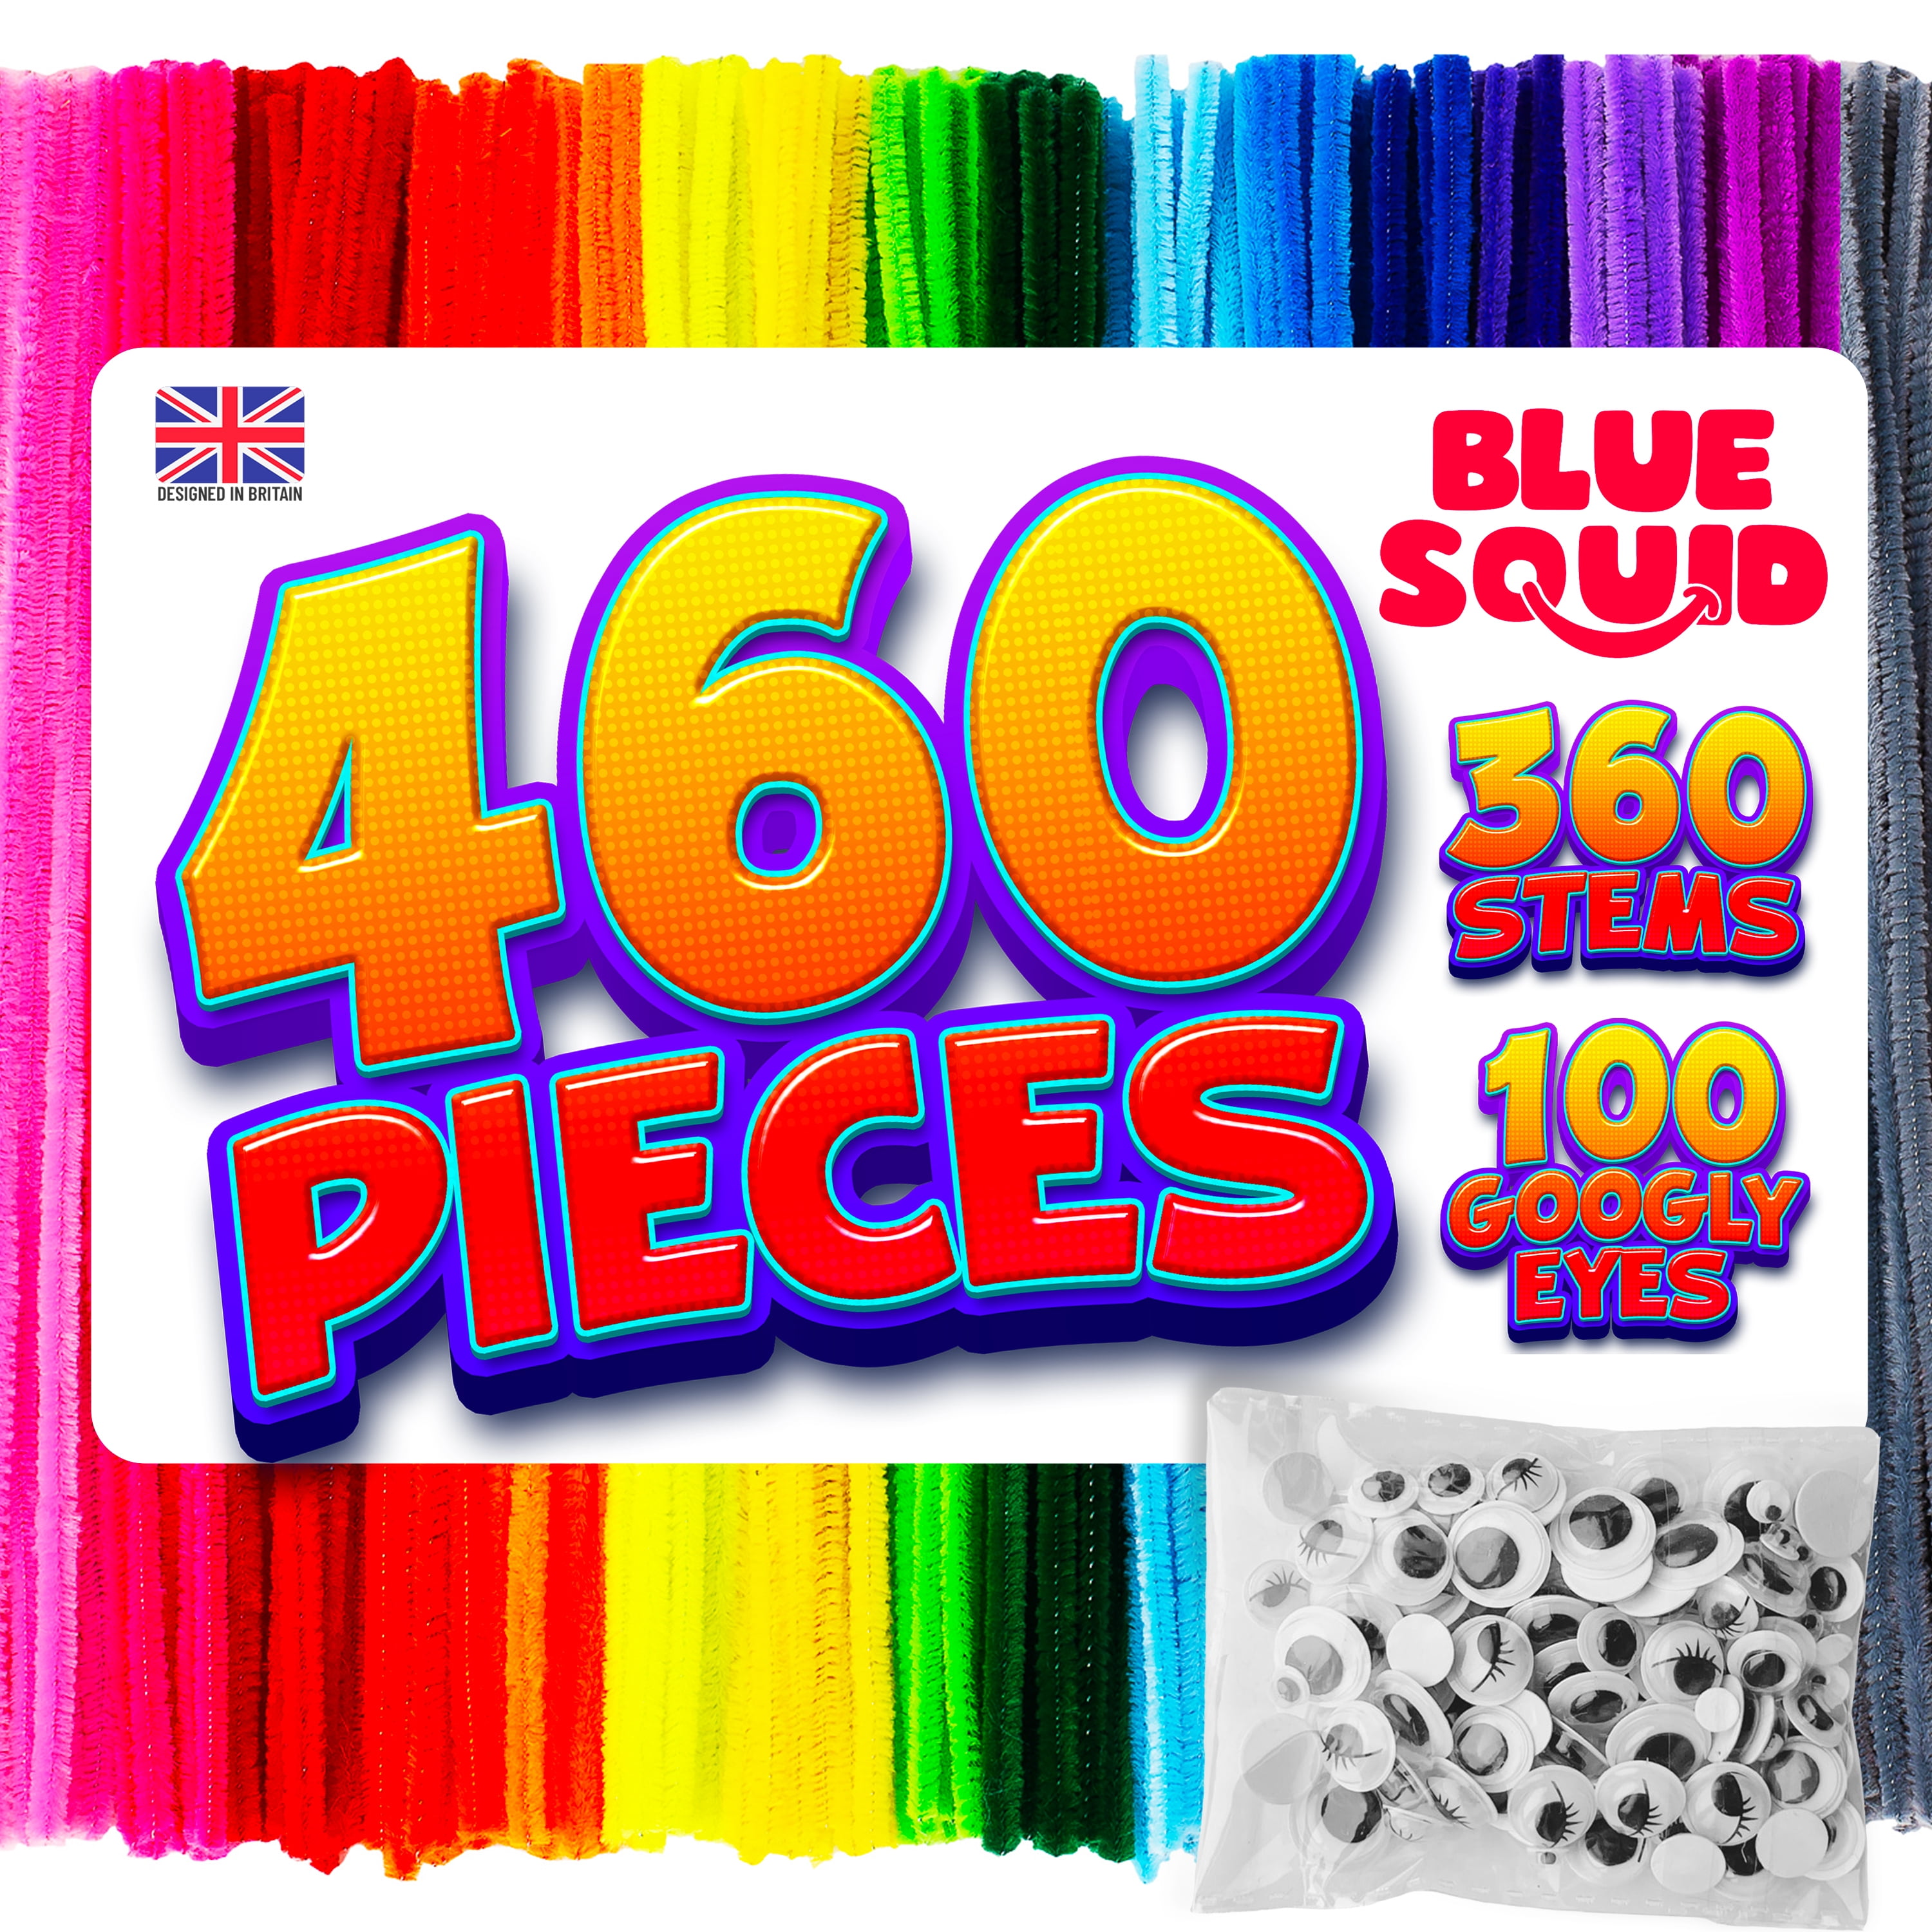 Blue Squid Arts and Crafts for Kids Craft Kit with Scissors Pipe Cleaners  Beads Googly Eyes 1250 Pieces 